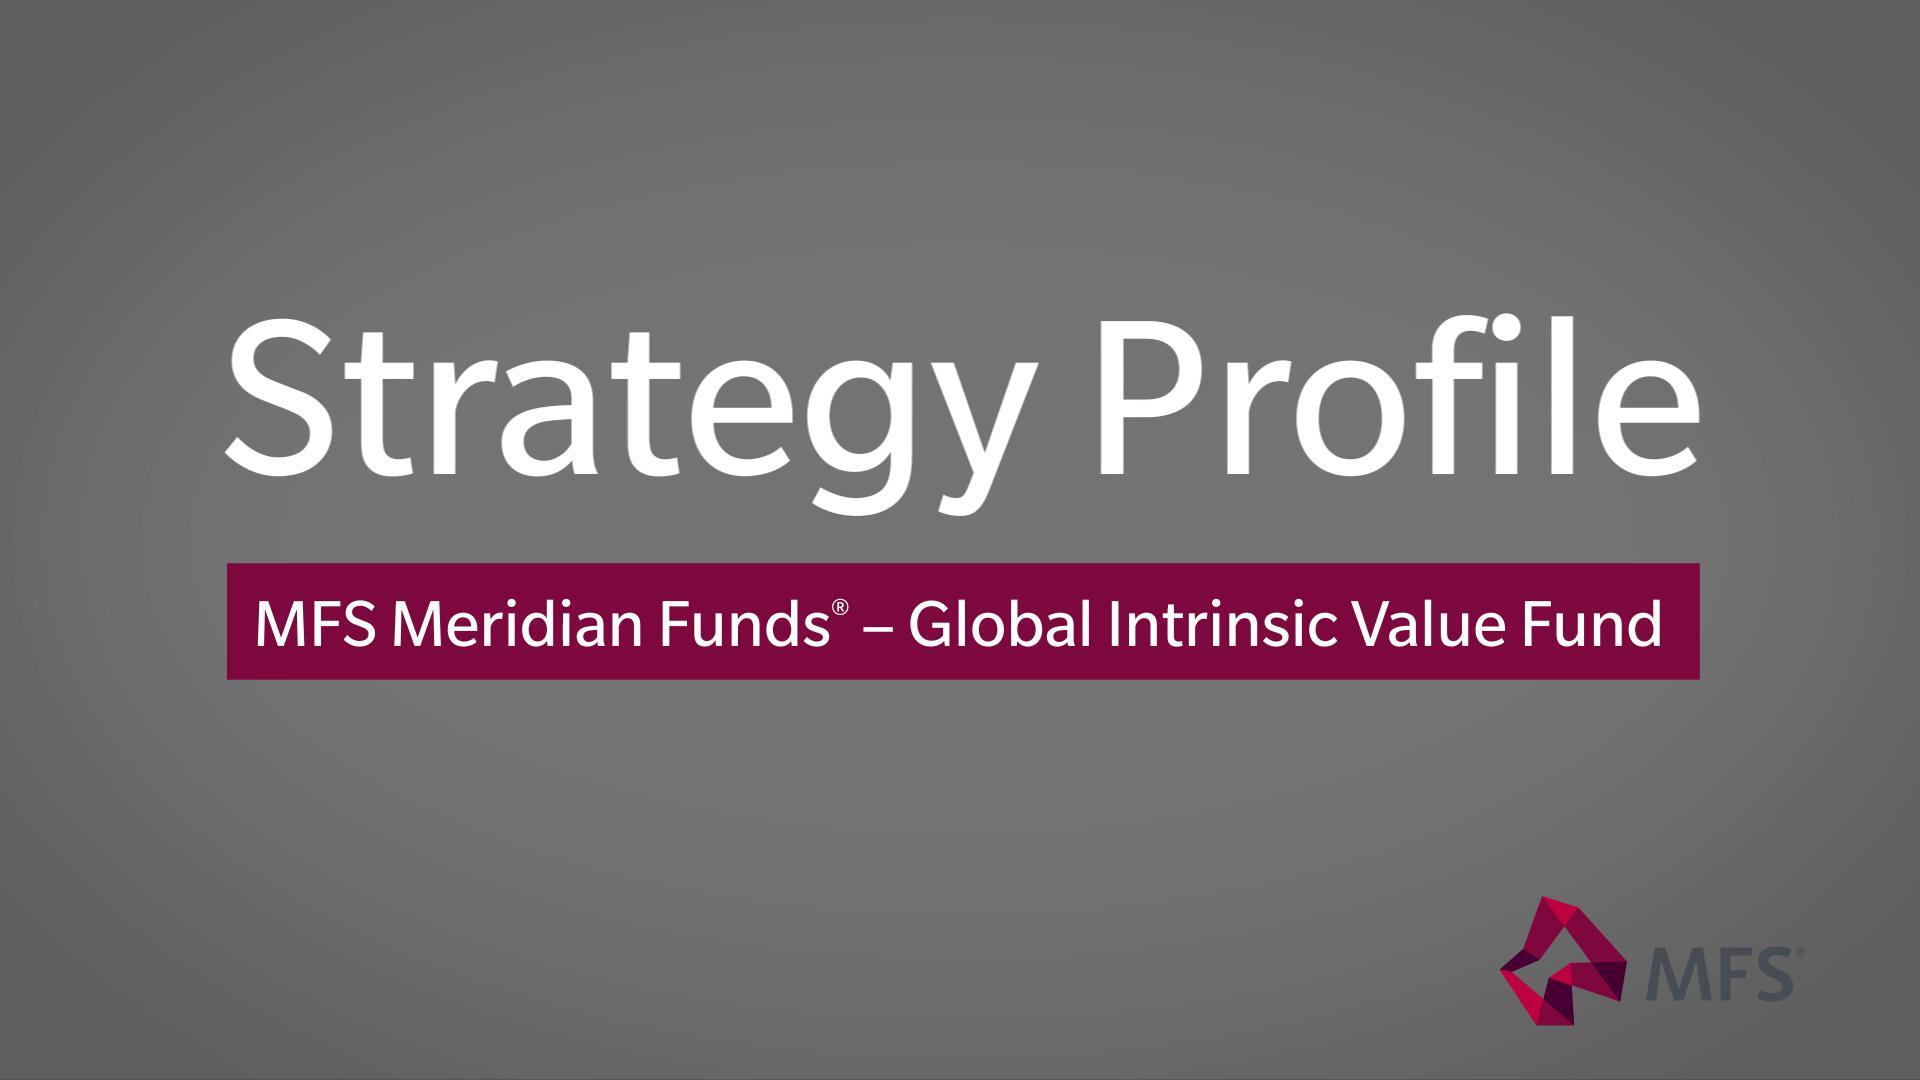 MFS Meridian Funds® – Global Intrinsic Value Fund